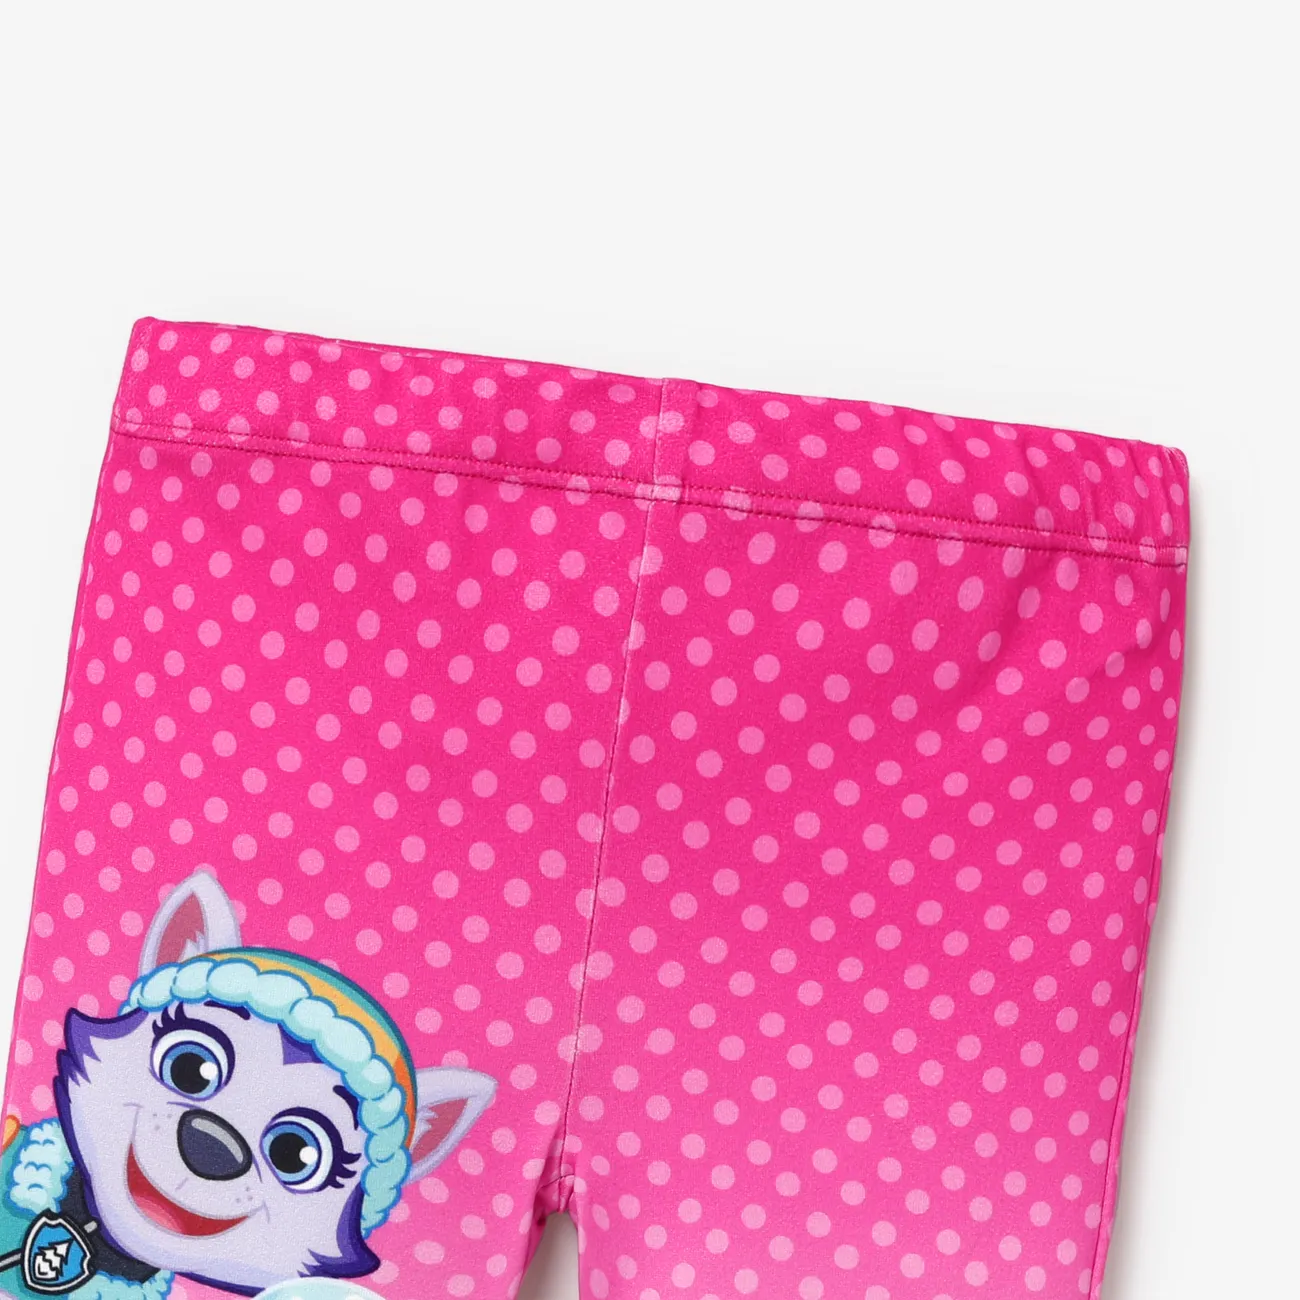 PAW Patrol Toddler Girl Puppy Blowing Bubbles Fun Gradient Leggings Colorful big image 1